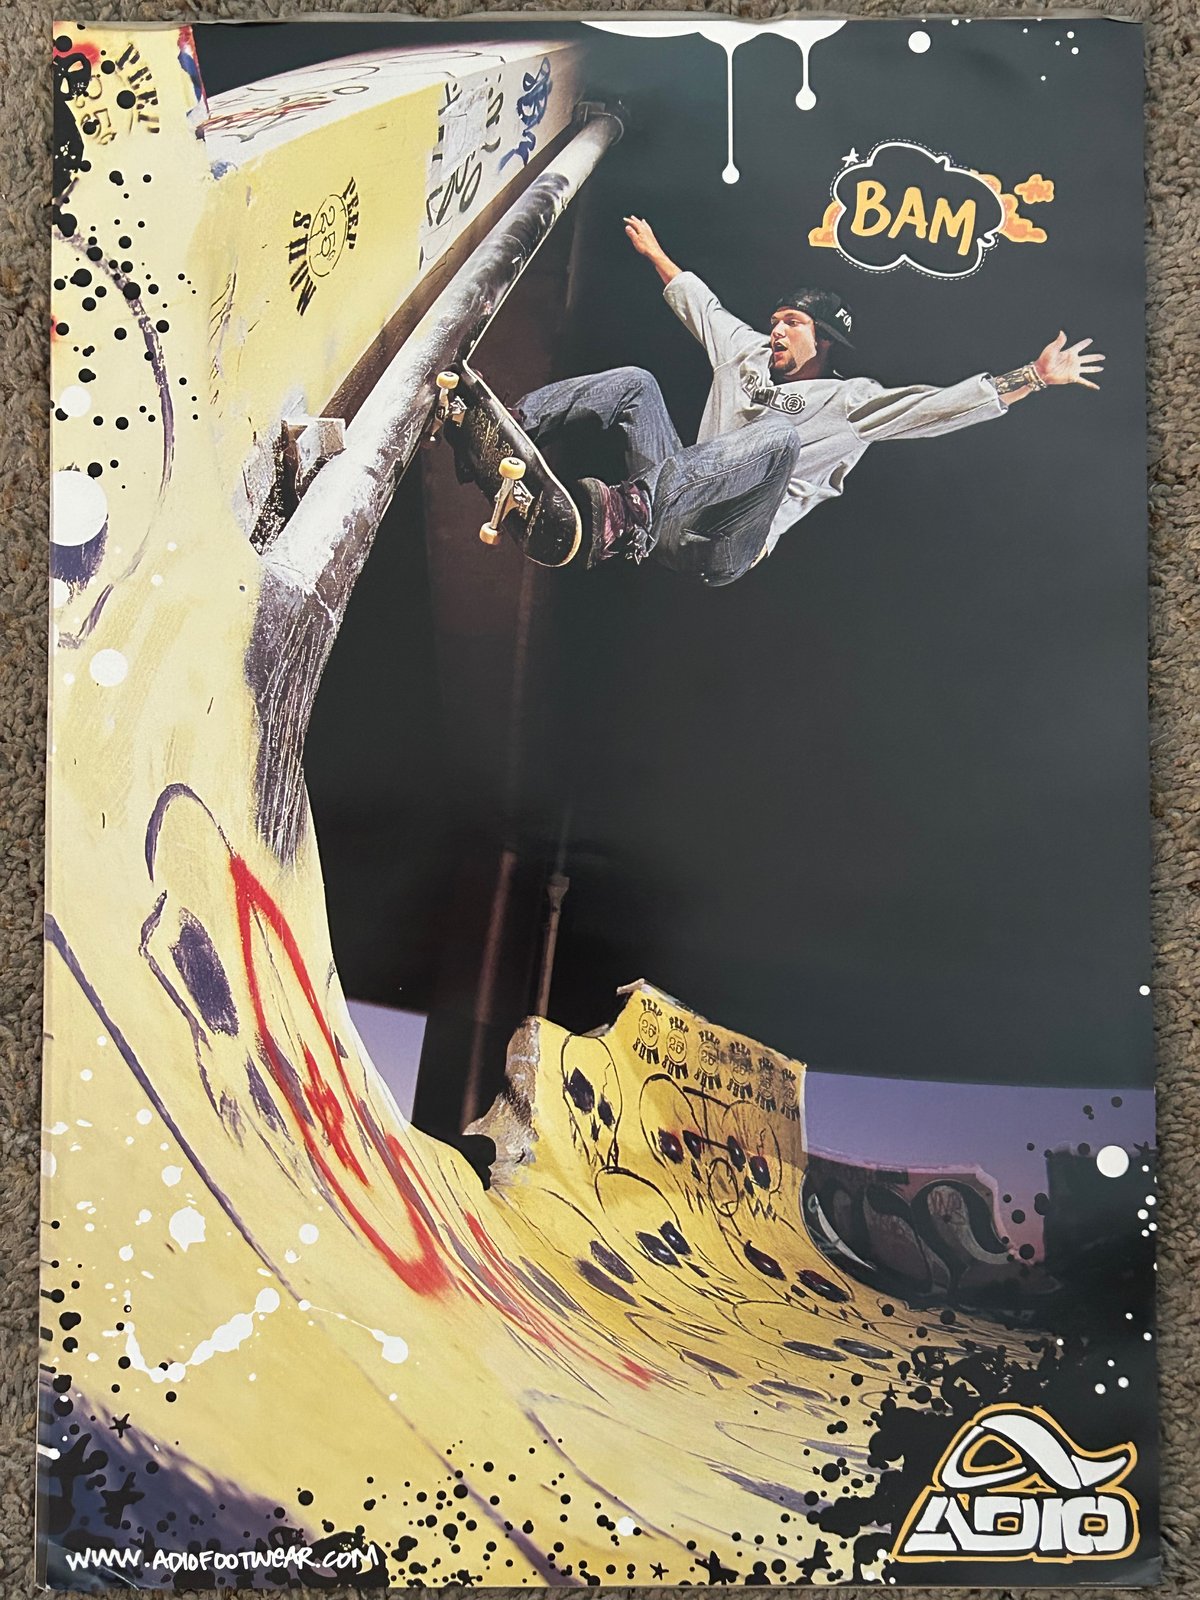 Signed, Double-Sided Vintage Skate Poster | Wraybros